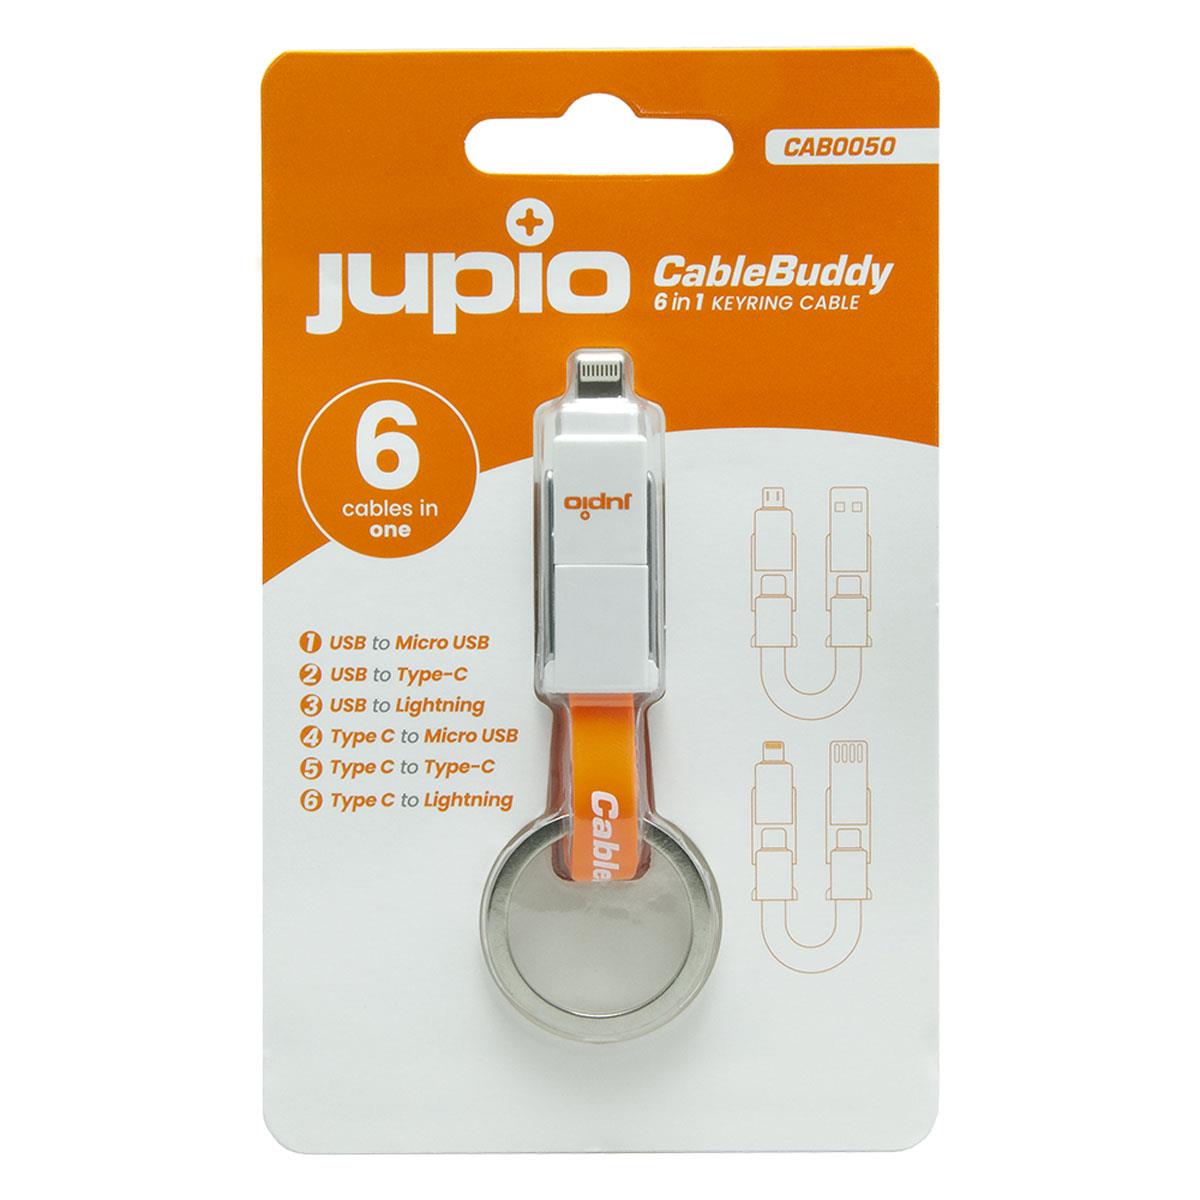 Image of Jupio CableBuddy 6-in-1 Keyring Cable